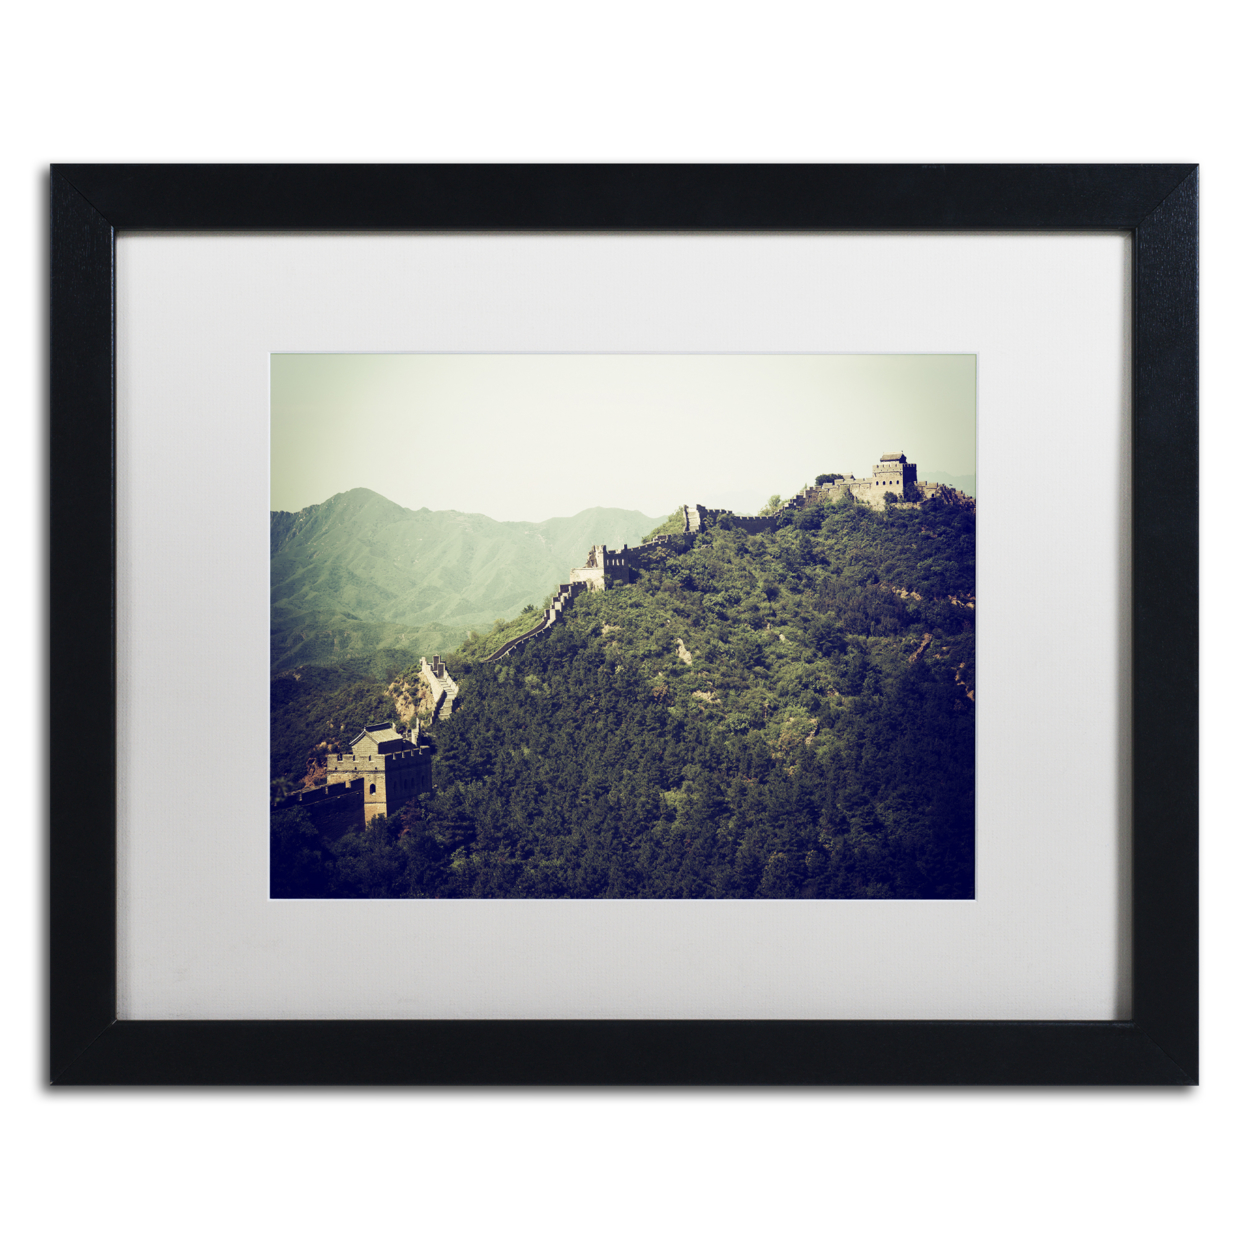 Philippe Hugonnard 'Great Wall' Black Wooden Framed Art 18 X 22 Inches